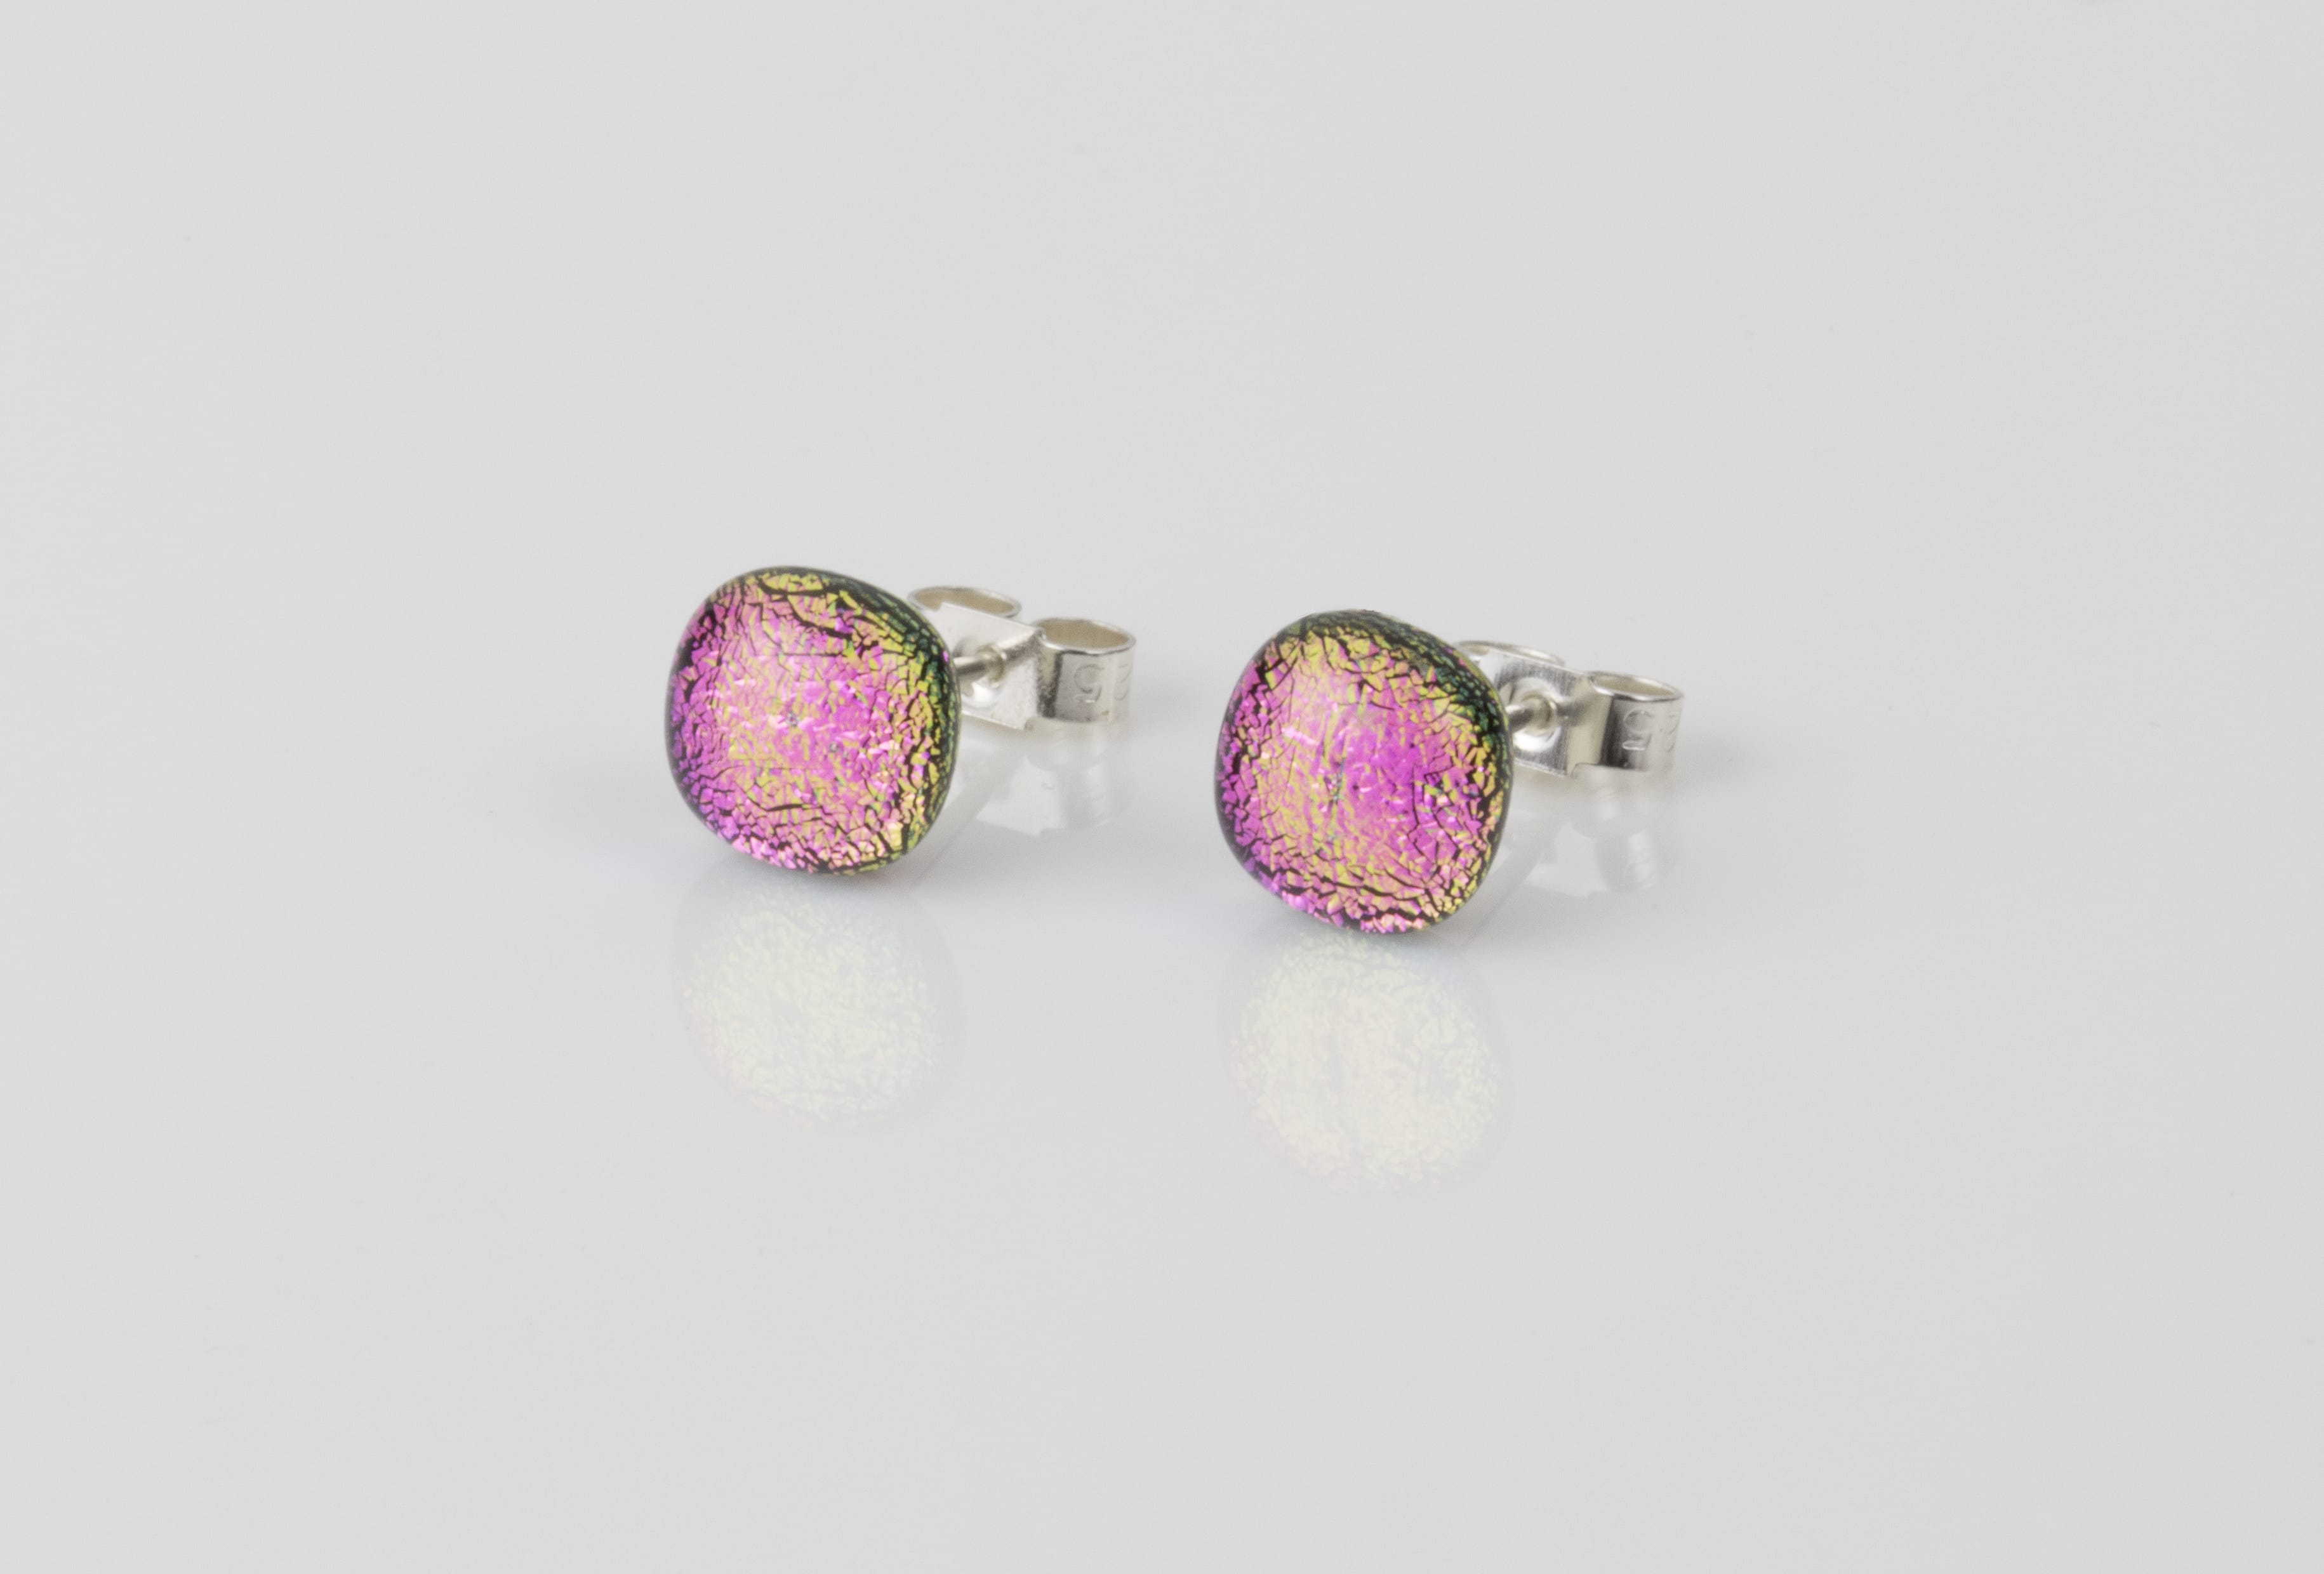 Dichroic glass jewellery uk, handmade stud earrings with hot pink dichroic glass, round, sterling glass 7-9mm, silver posts.